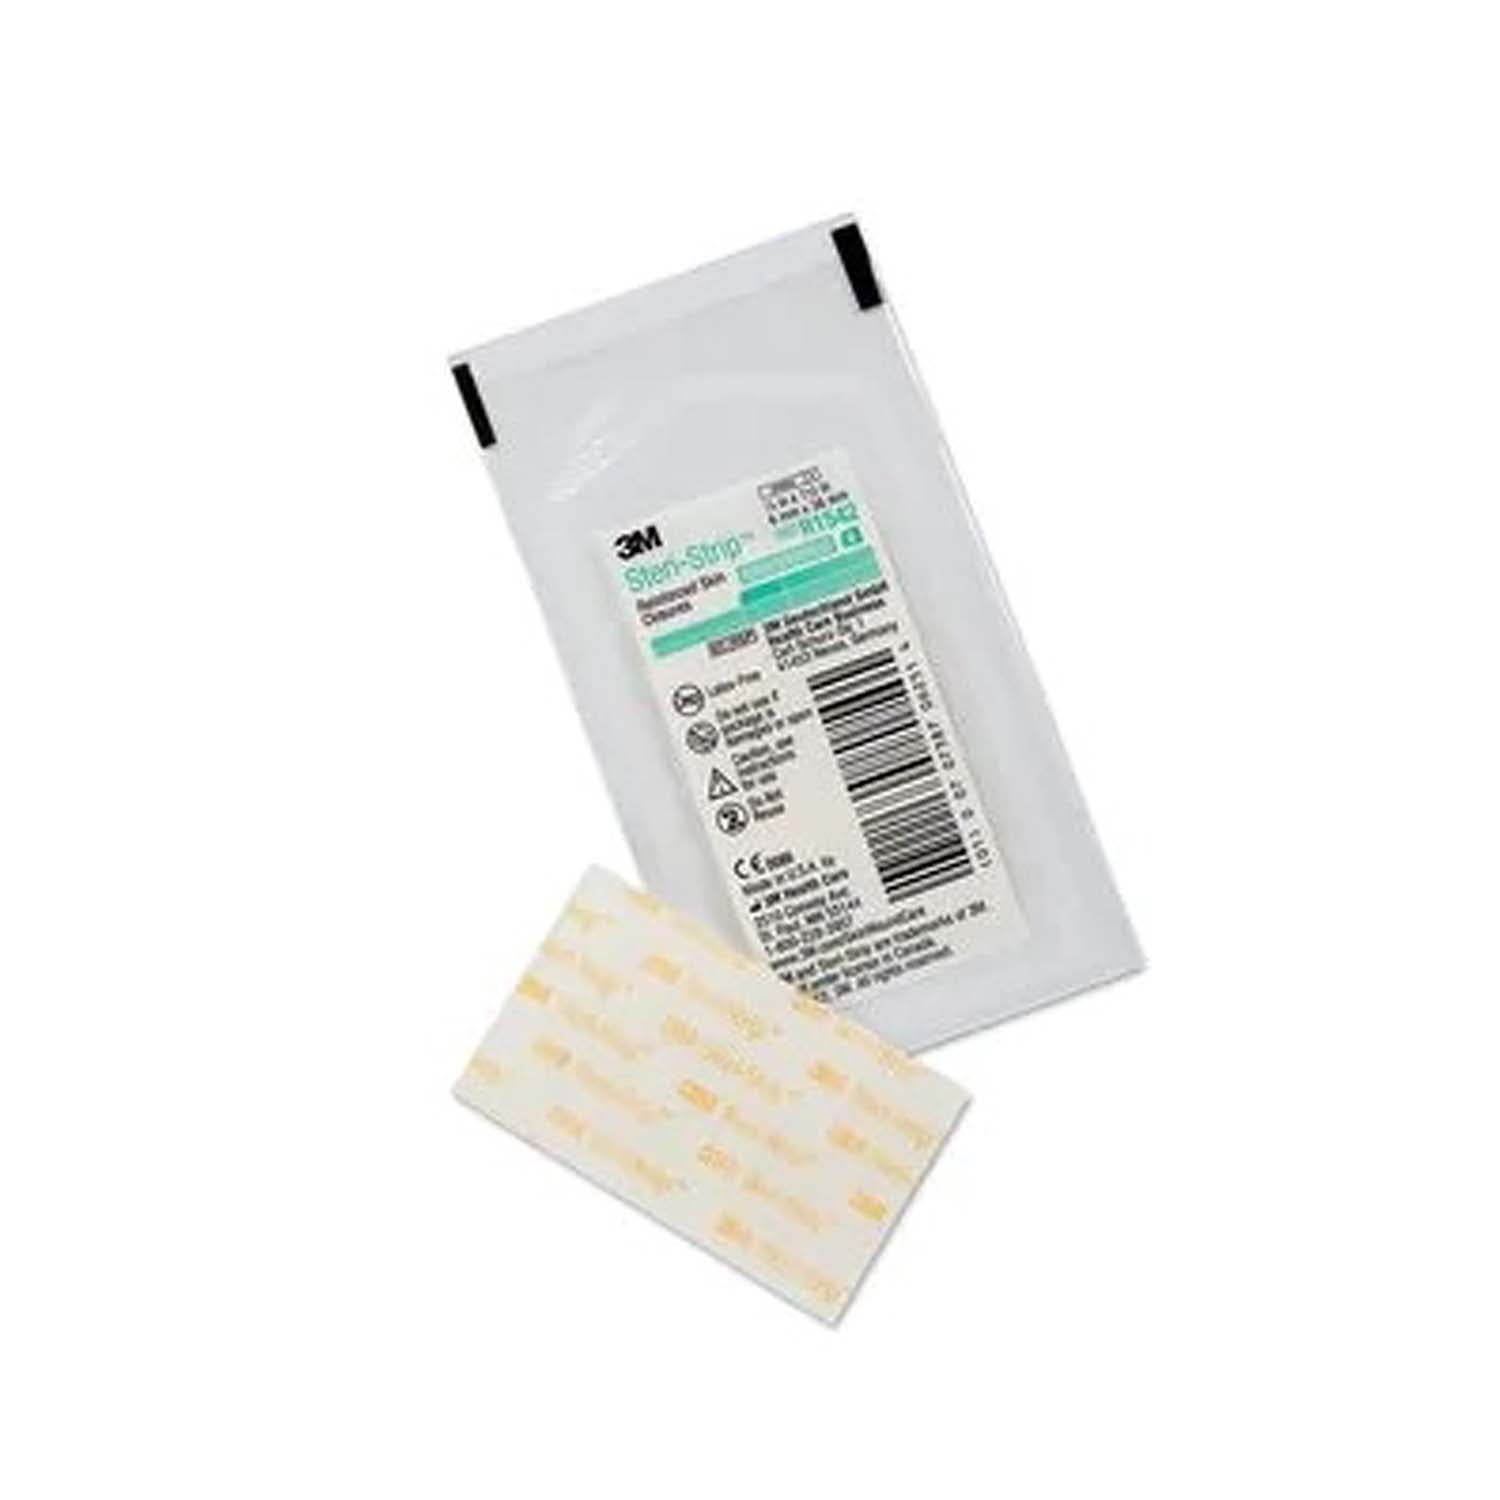 3M Steri-Strips Reinforced Adhesive Skin Closures | 6 x 38 mm | Pack of 50